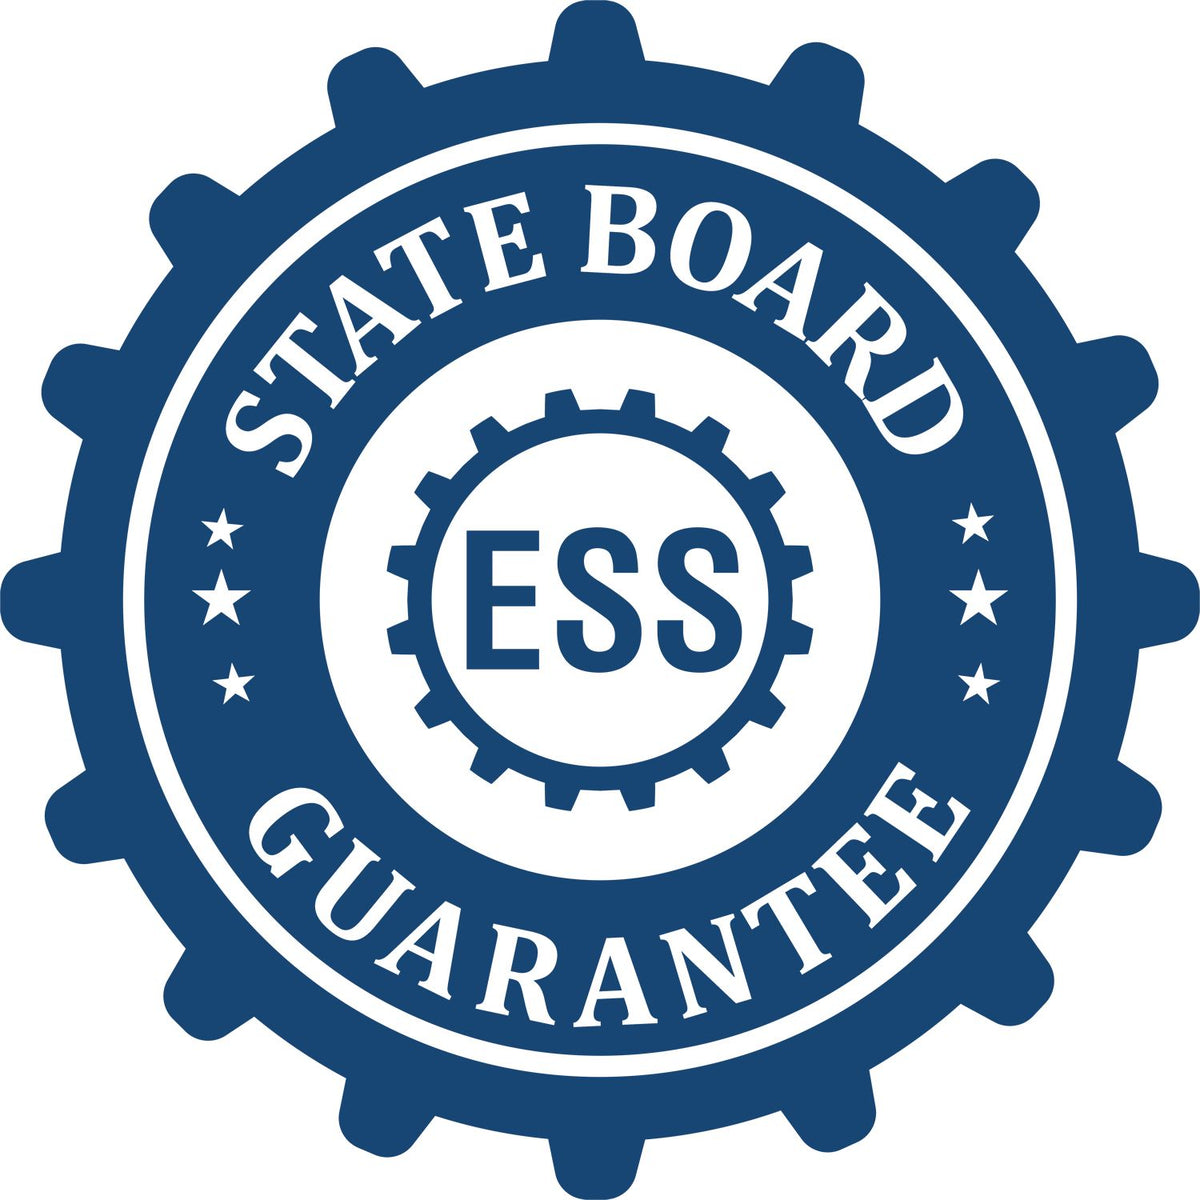 An emblem in a gear shape illustrating a state board guarantee for the Premium MaxLight Pre-Inked Rhode Island Engineering Stamp product.